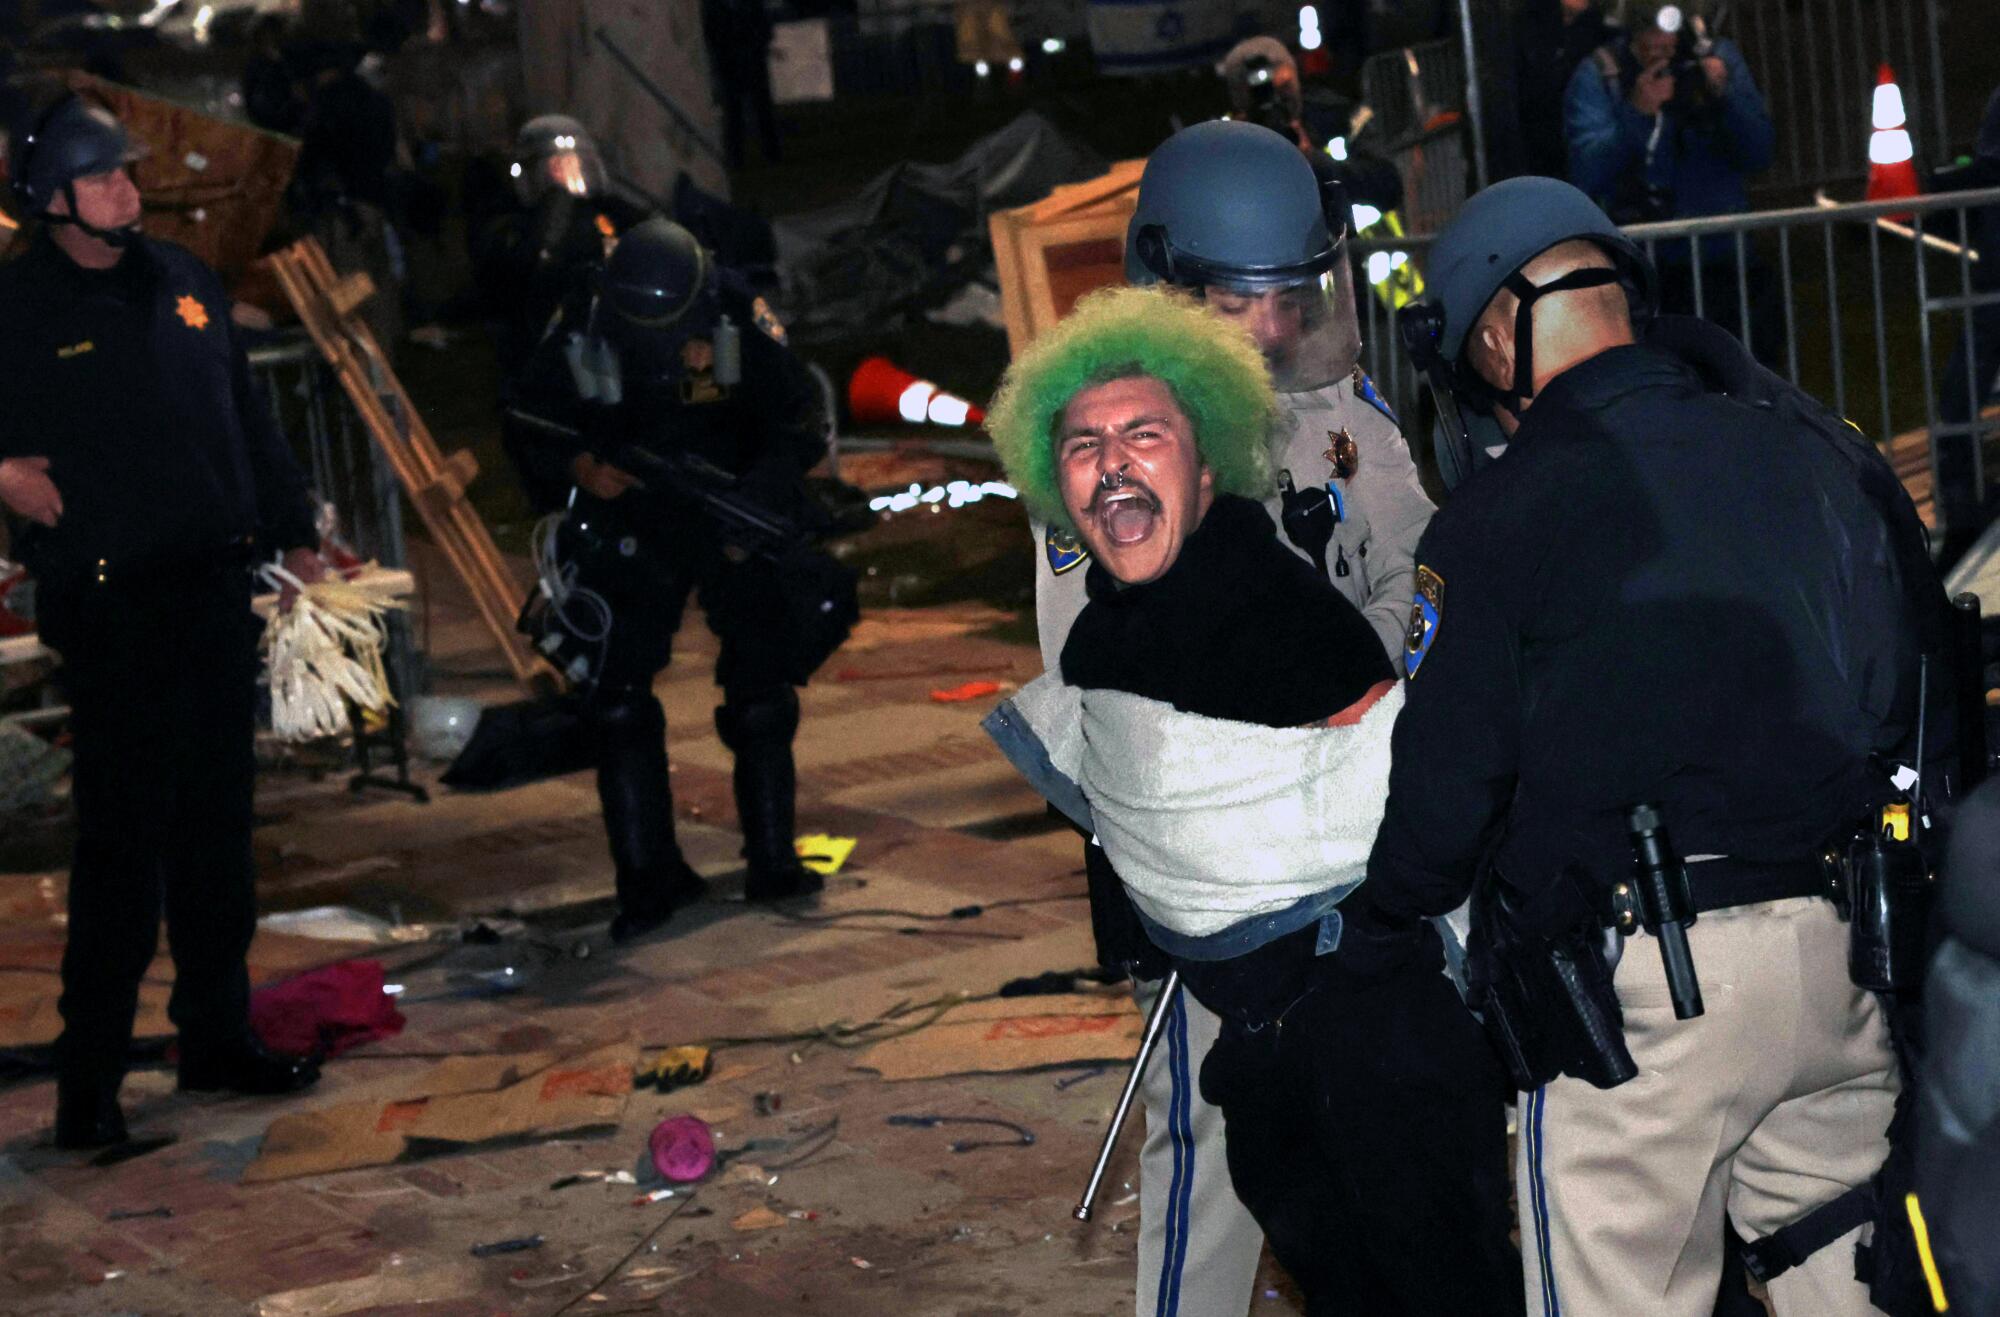 Police officers arrest a pro-Palestinian protester after an oder to disperse was given at UCLA early Thursday morning.